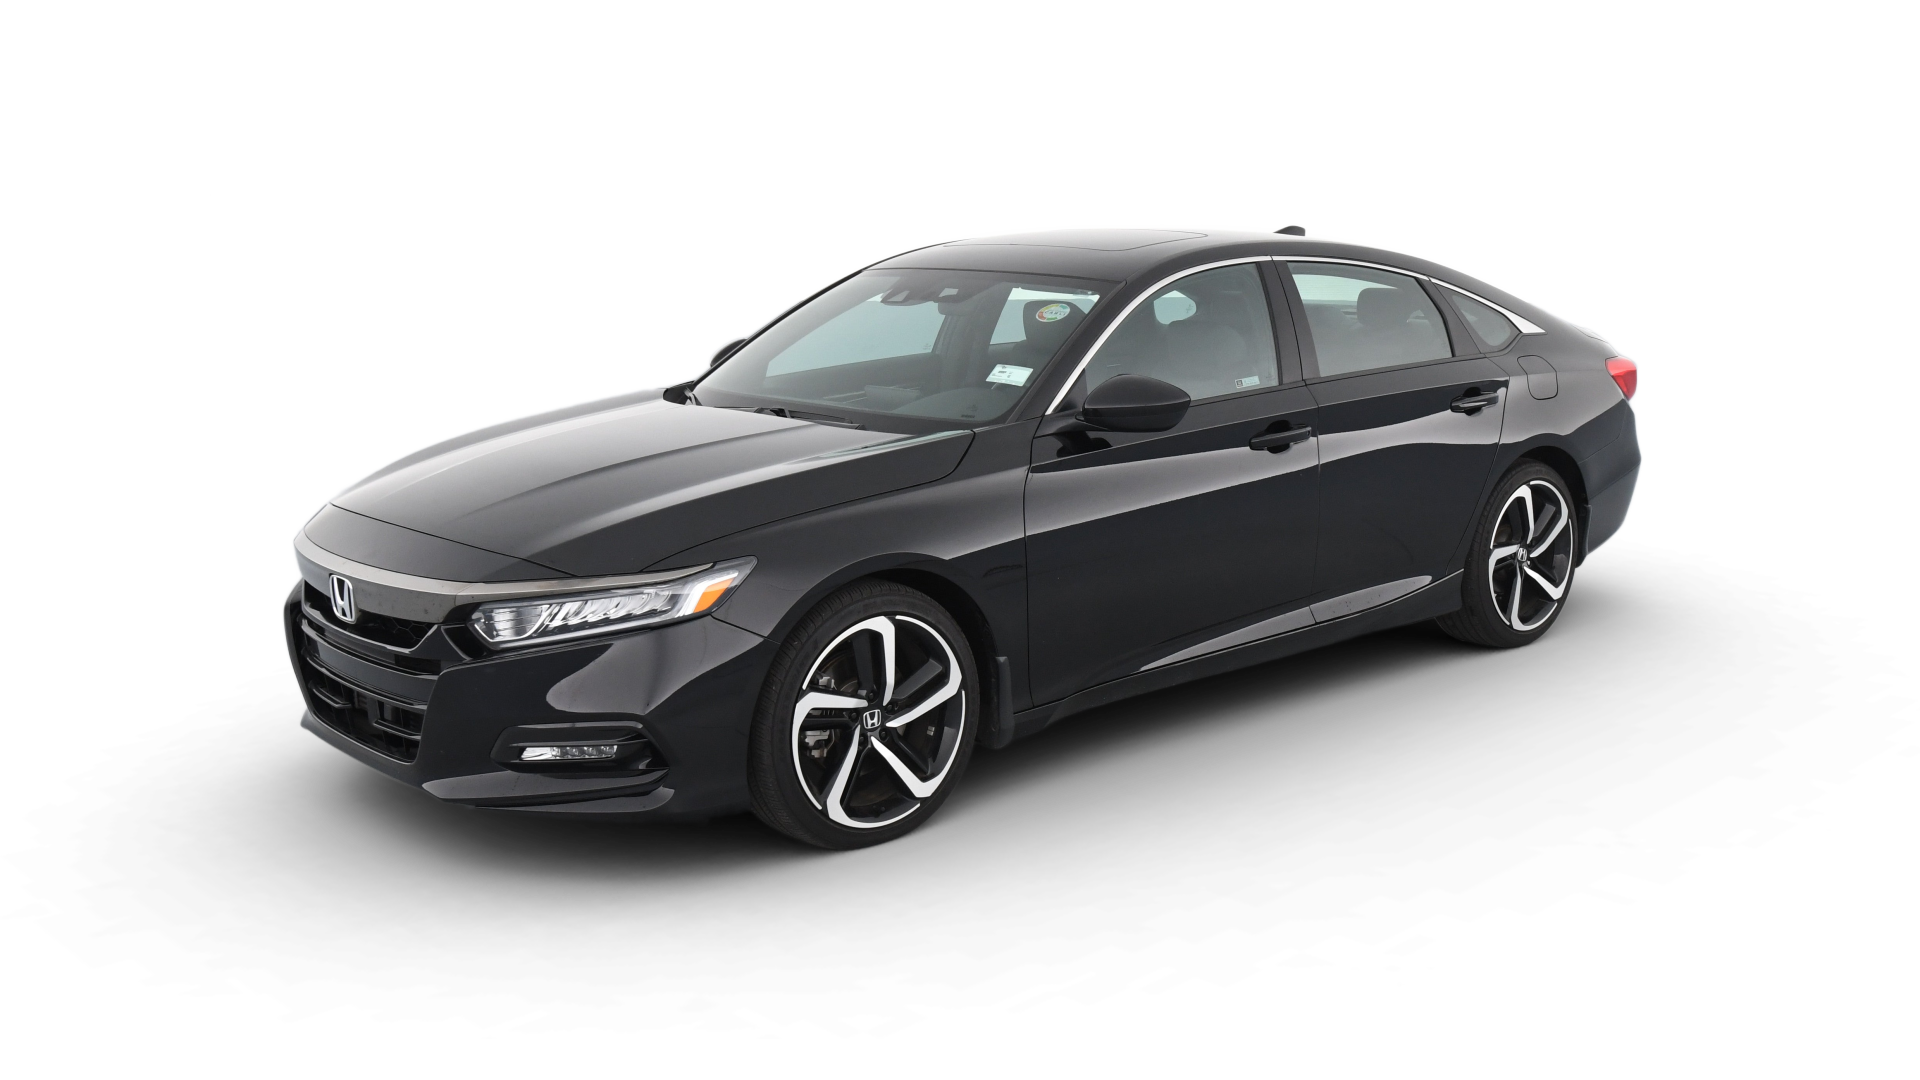 Used Honda Accord For Sale Online | Carvana